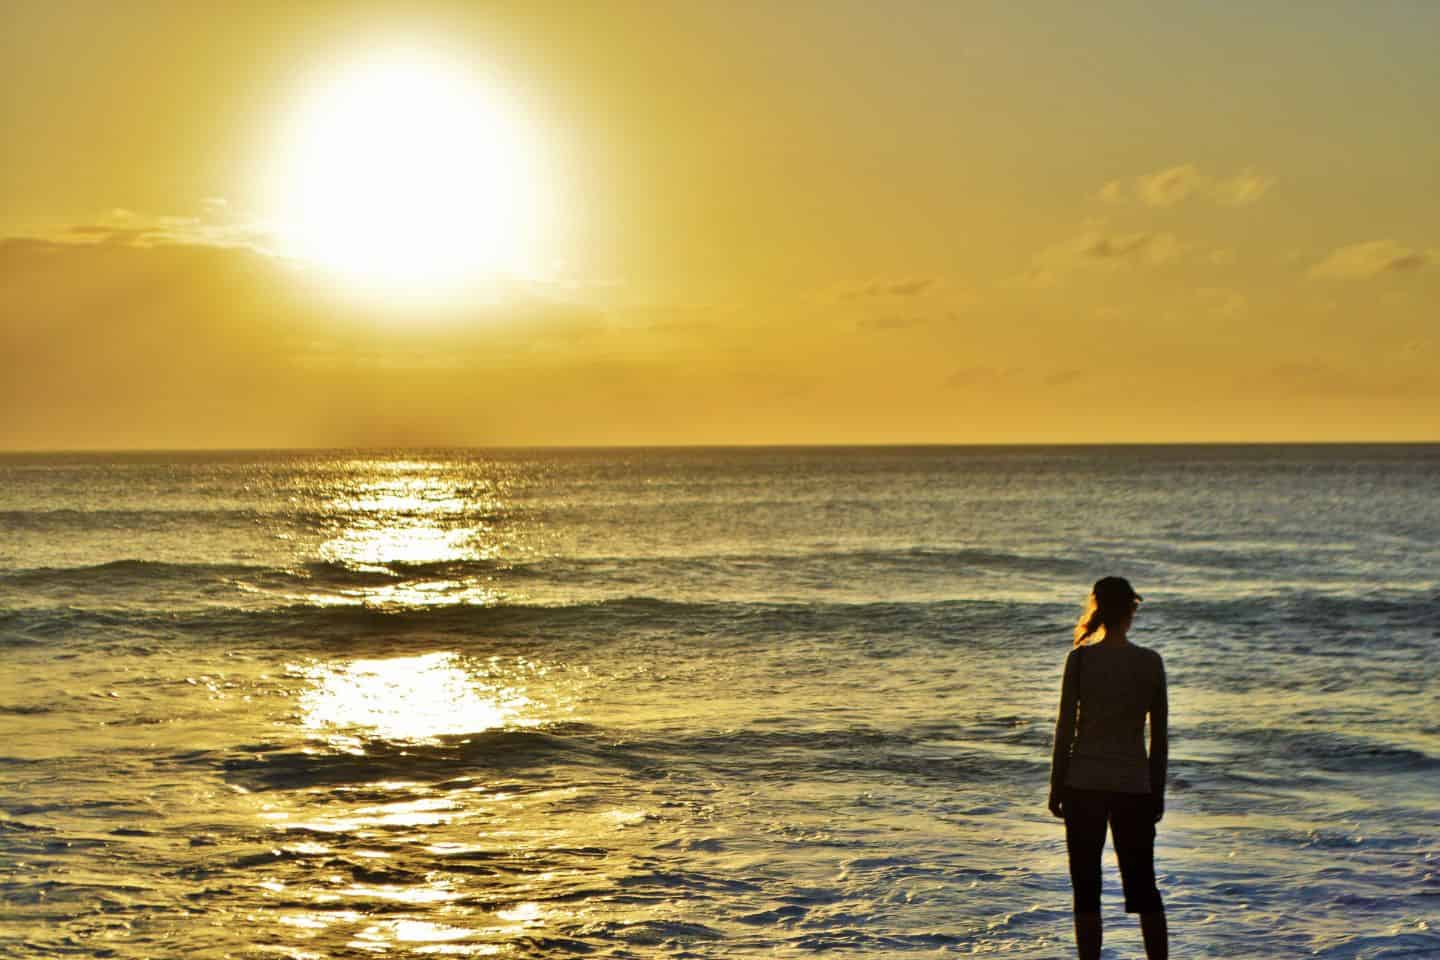 Silhouette of a woman on a beach at sunset